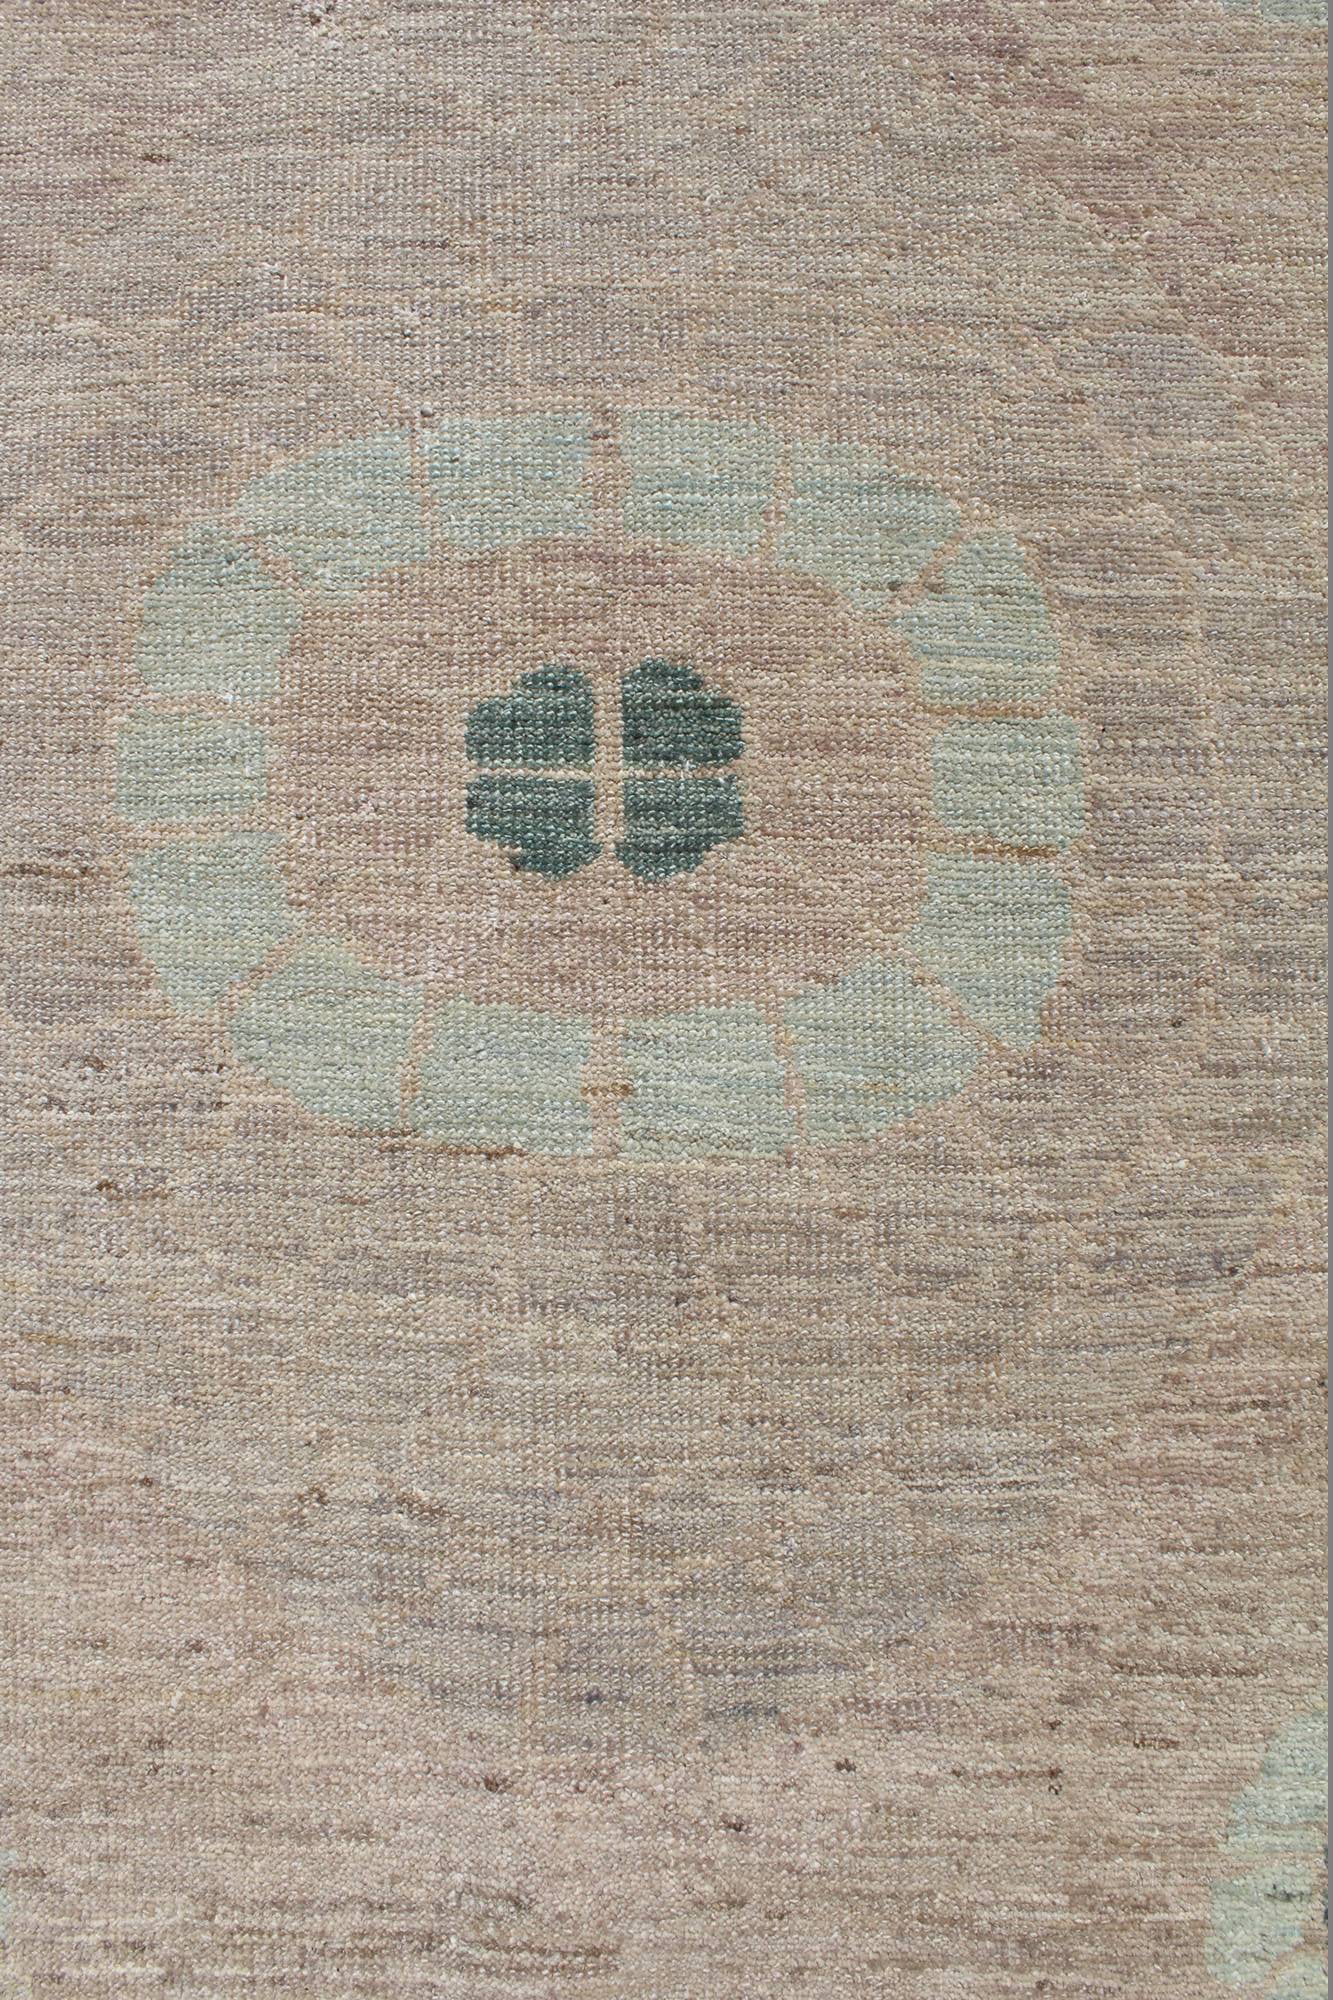 Unique Handwoven Rugs for Sale | Landry & Arcari – Page 5